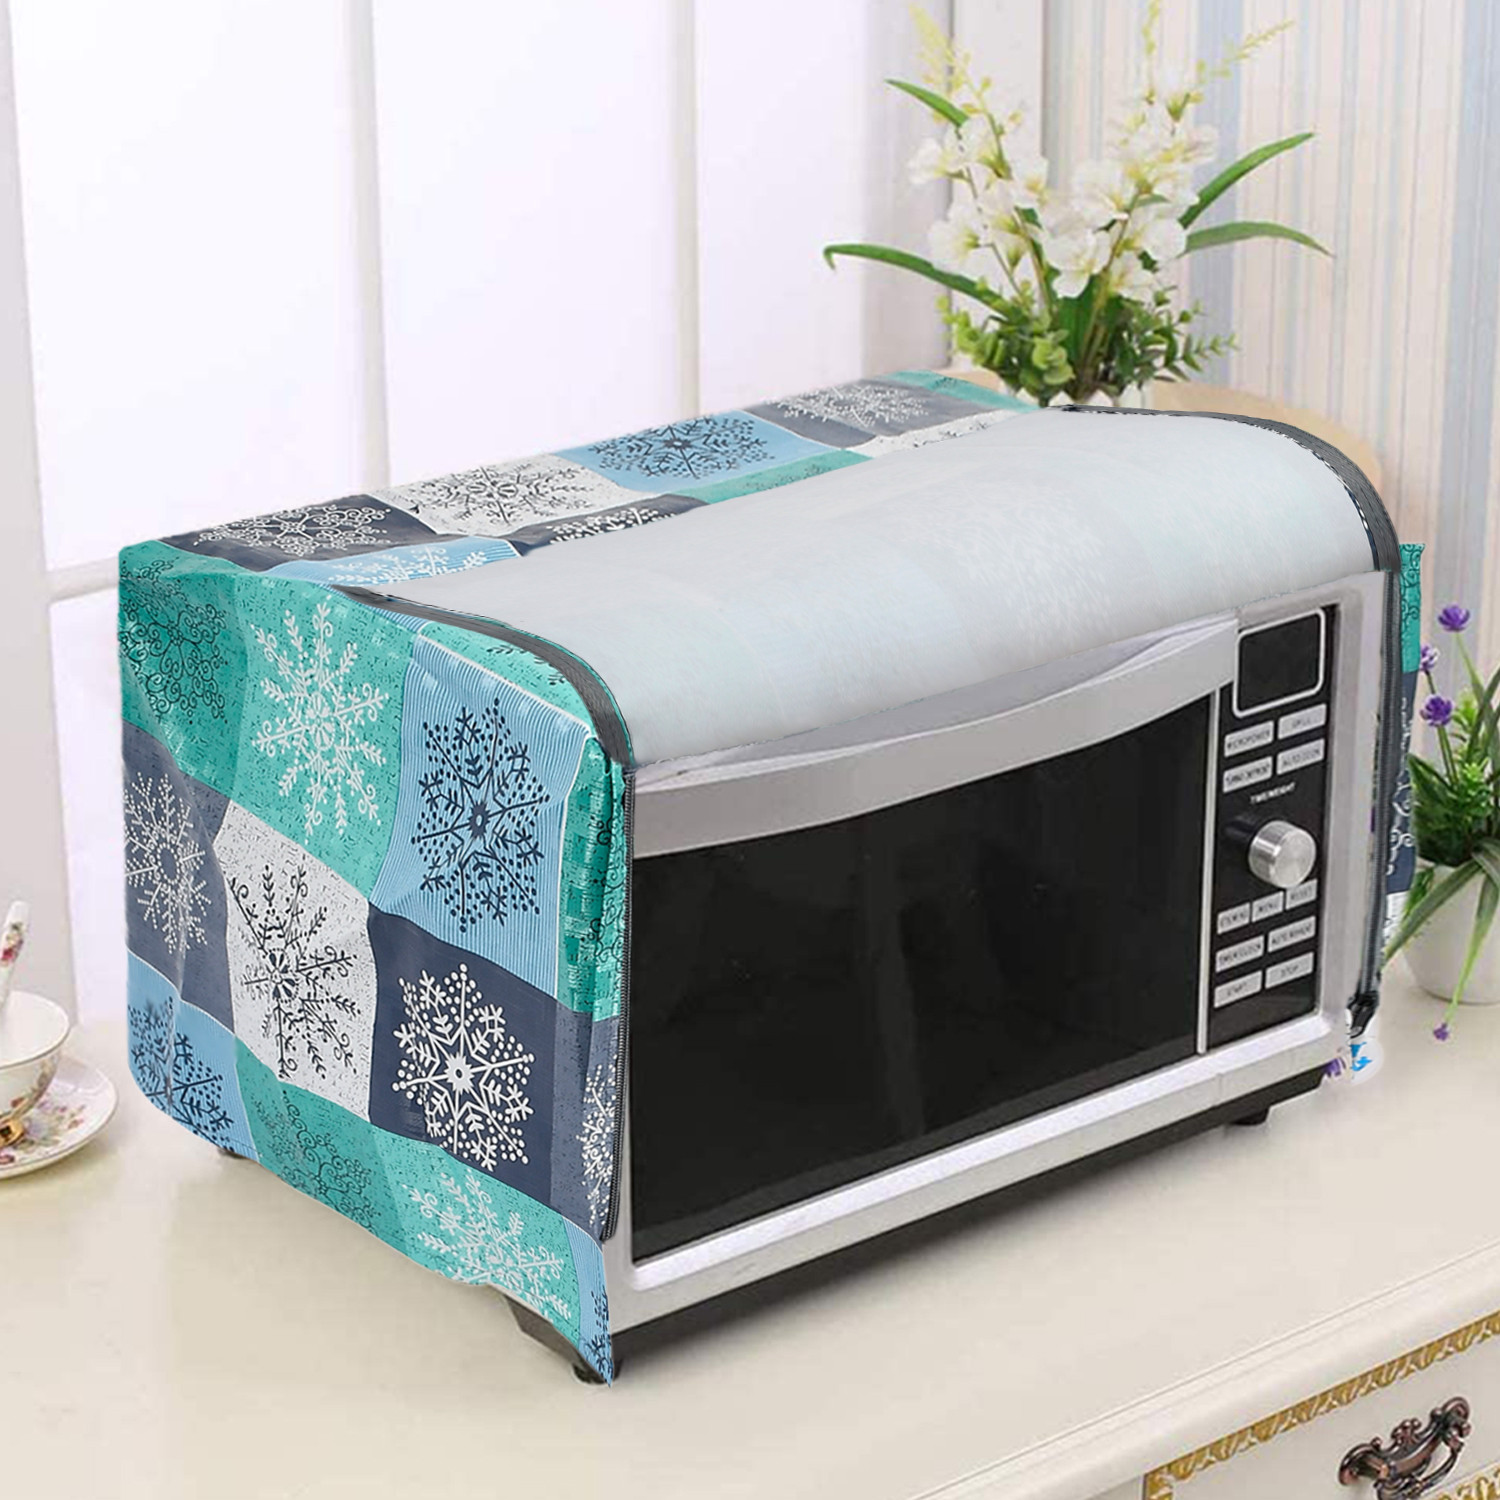 Kuber Industries PVC Check Printed Microwave Oven Cover, Dustproof Machine Protector Cover,30 Ltr. (Sky Blue)